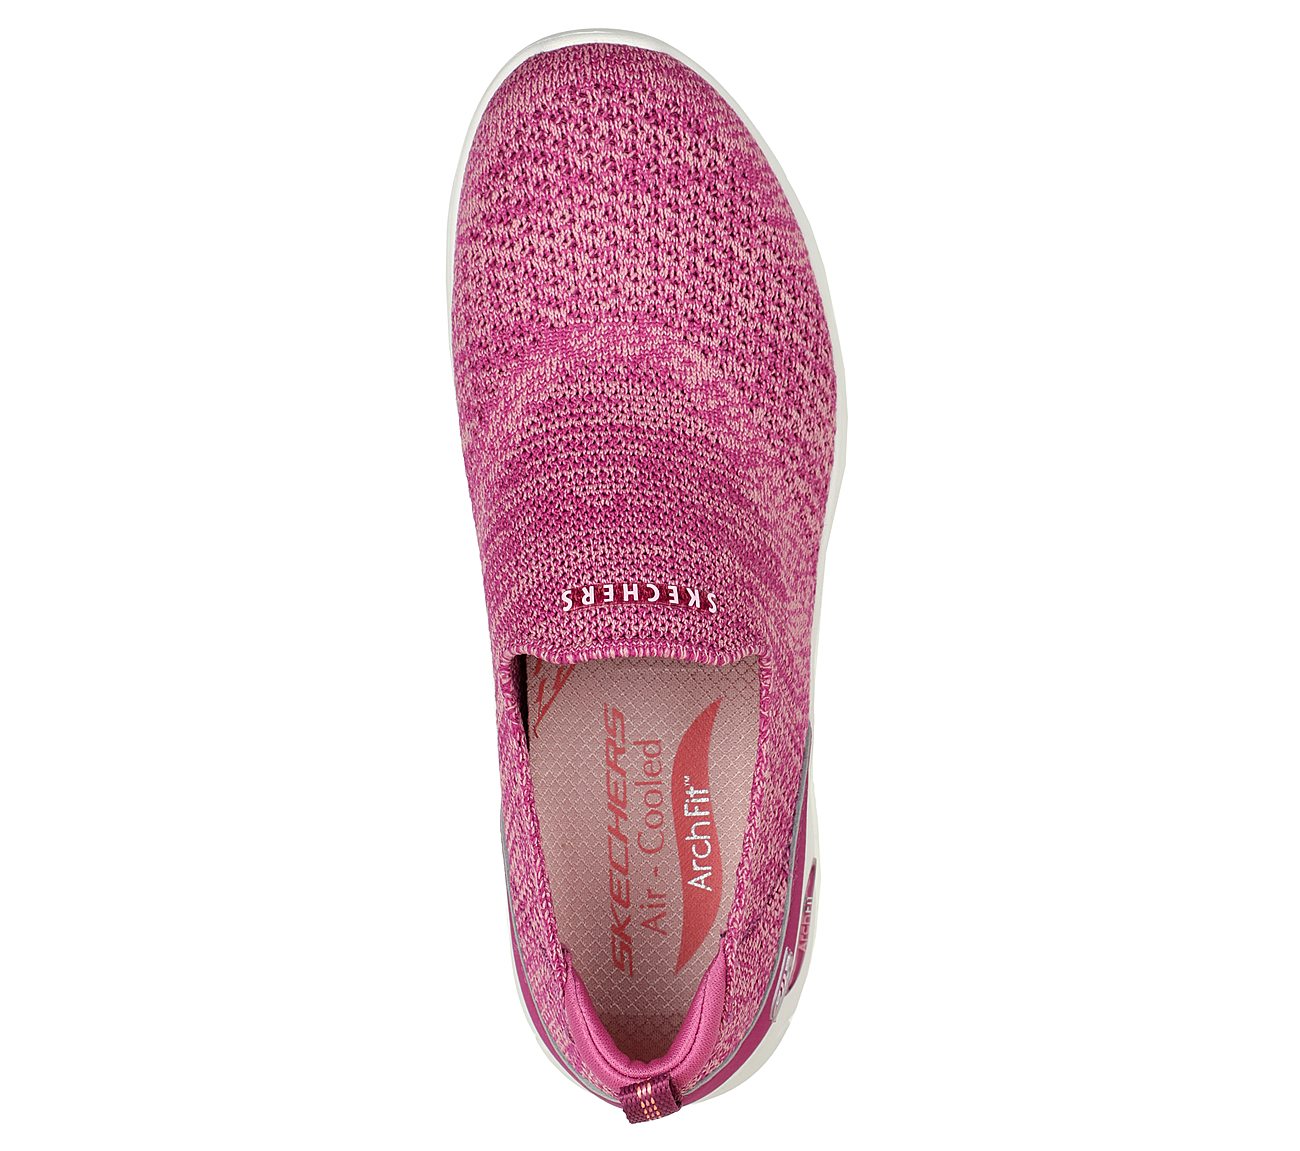 ARCH FIT REFINE - DON'T GO, RASPBERRY Footwear Top View